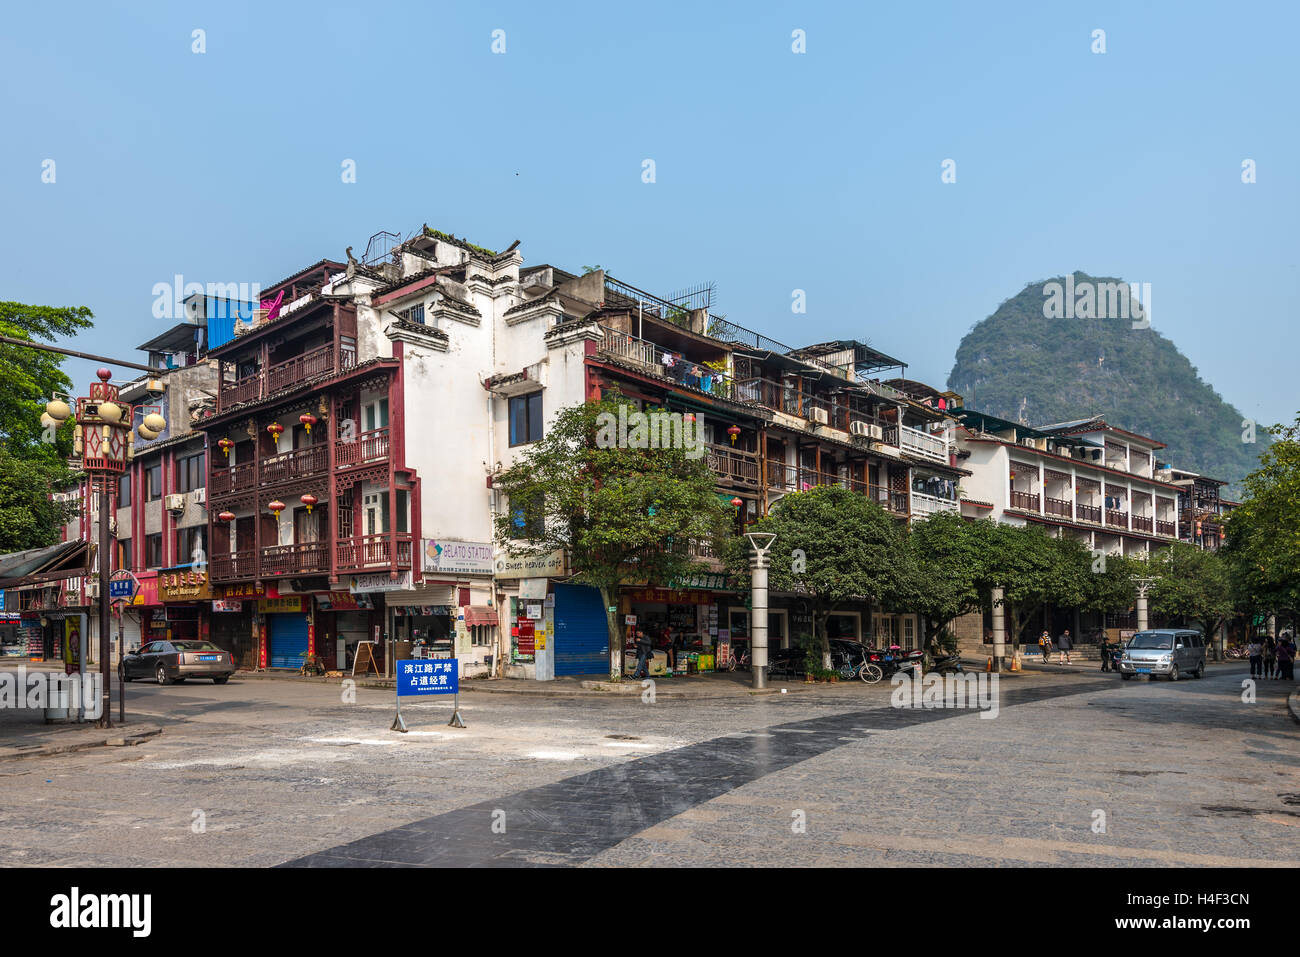 One of the main streets of Yangshuo Stock Photo